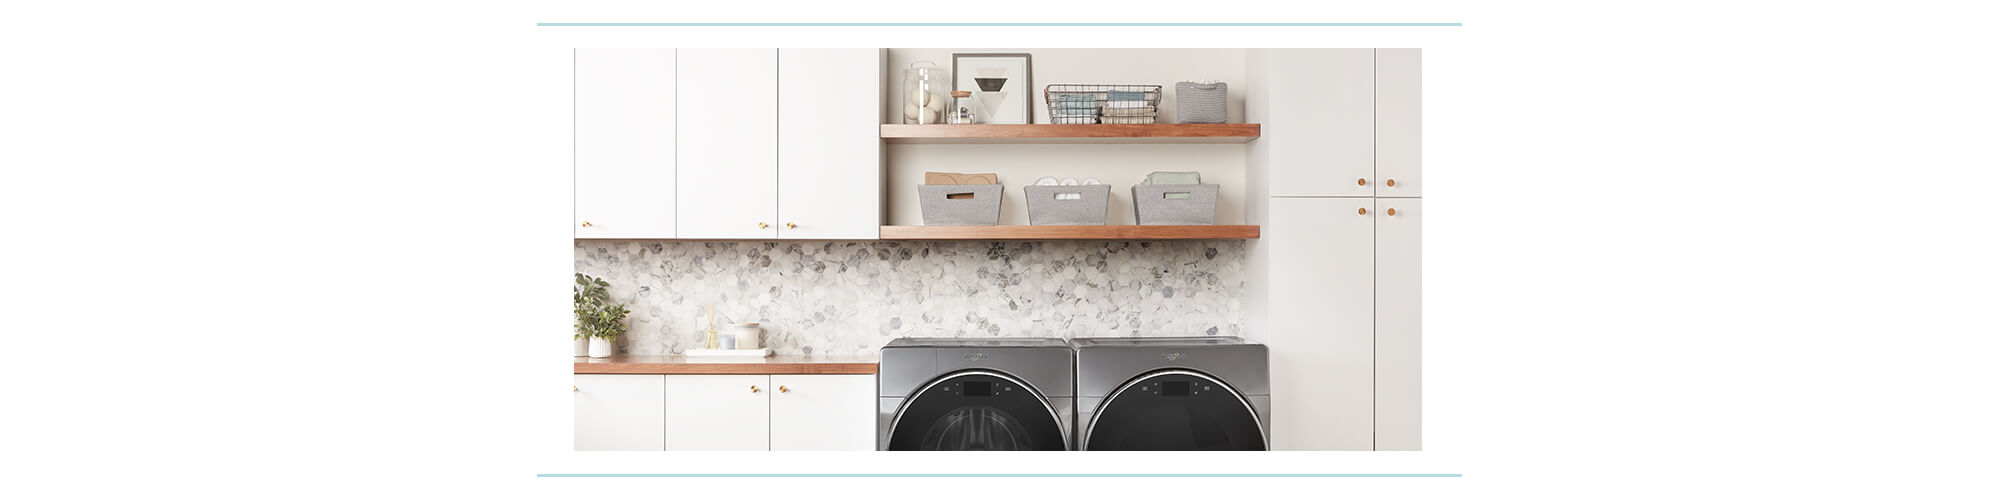 A neatly organized laundry room with open shelves, white cabinets, and Whirlpool front loading washer and dryer